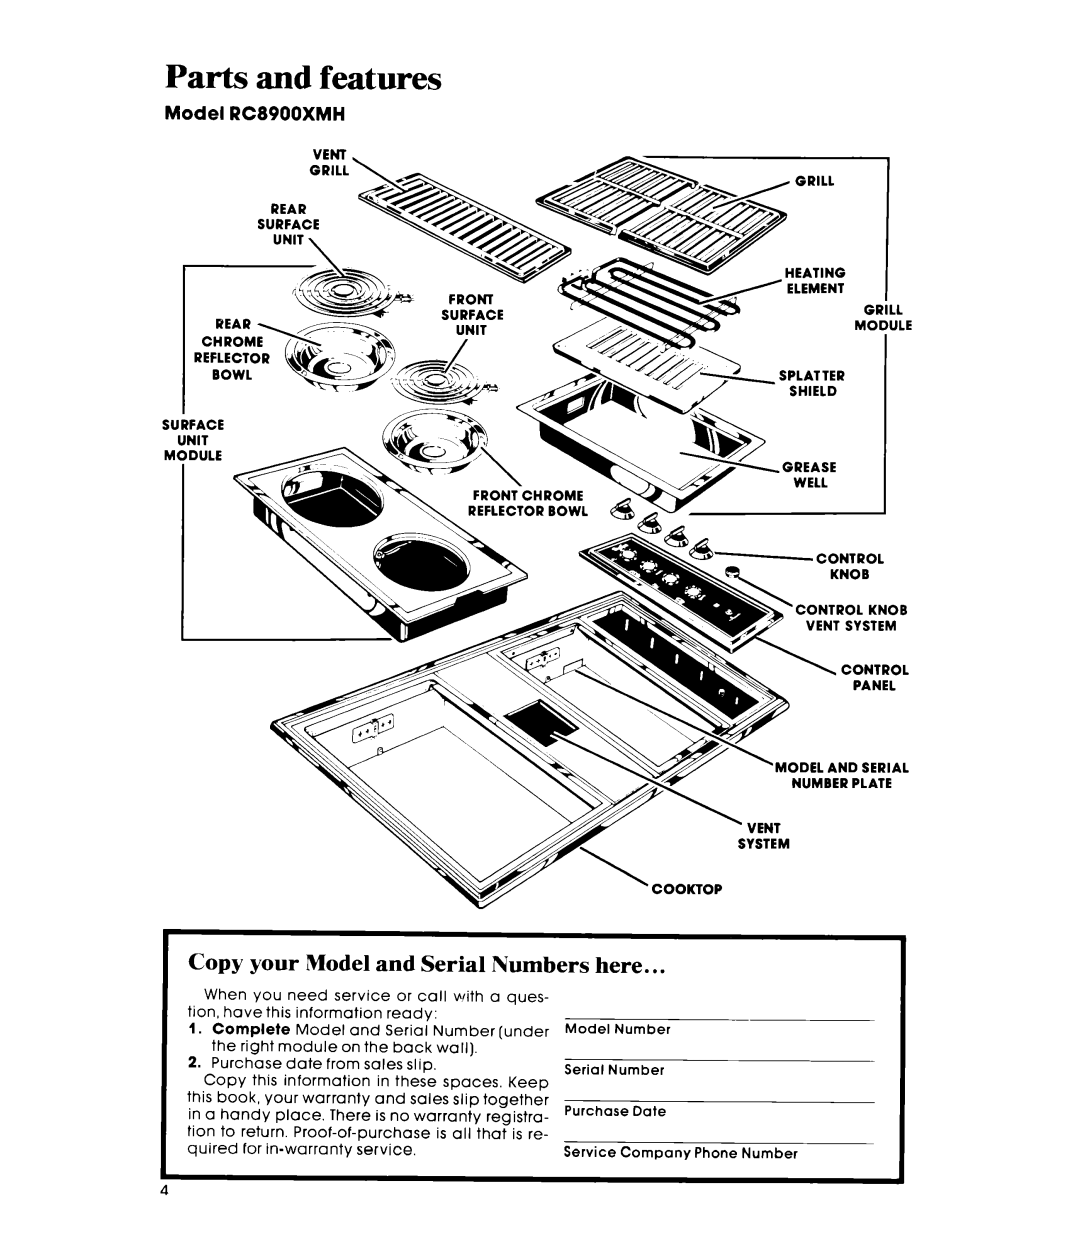 Whirlpool manual Parts and features, Copy your Model and Serial Numbers here, Model RC8900XMH 